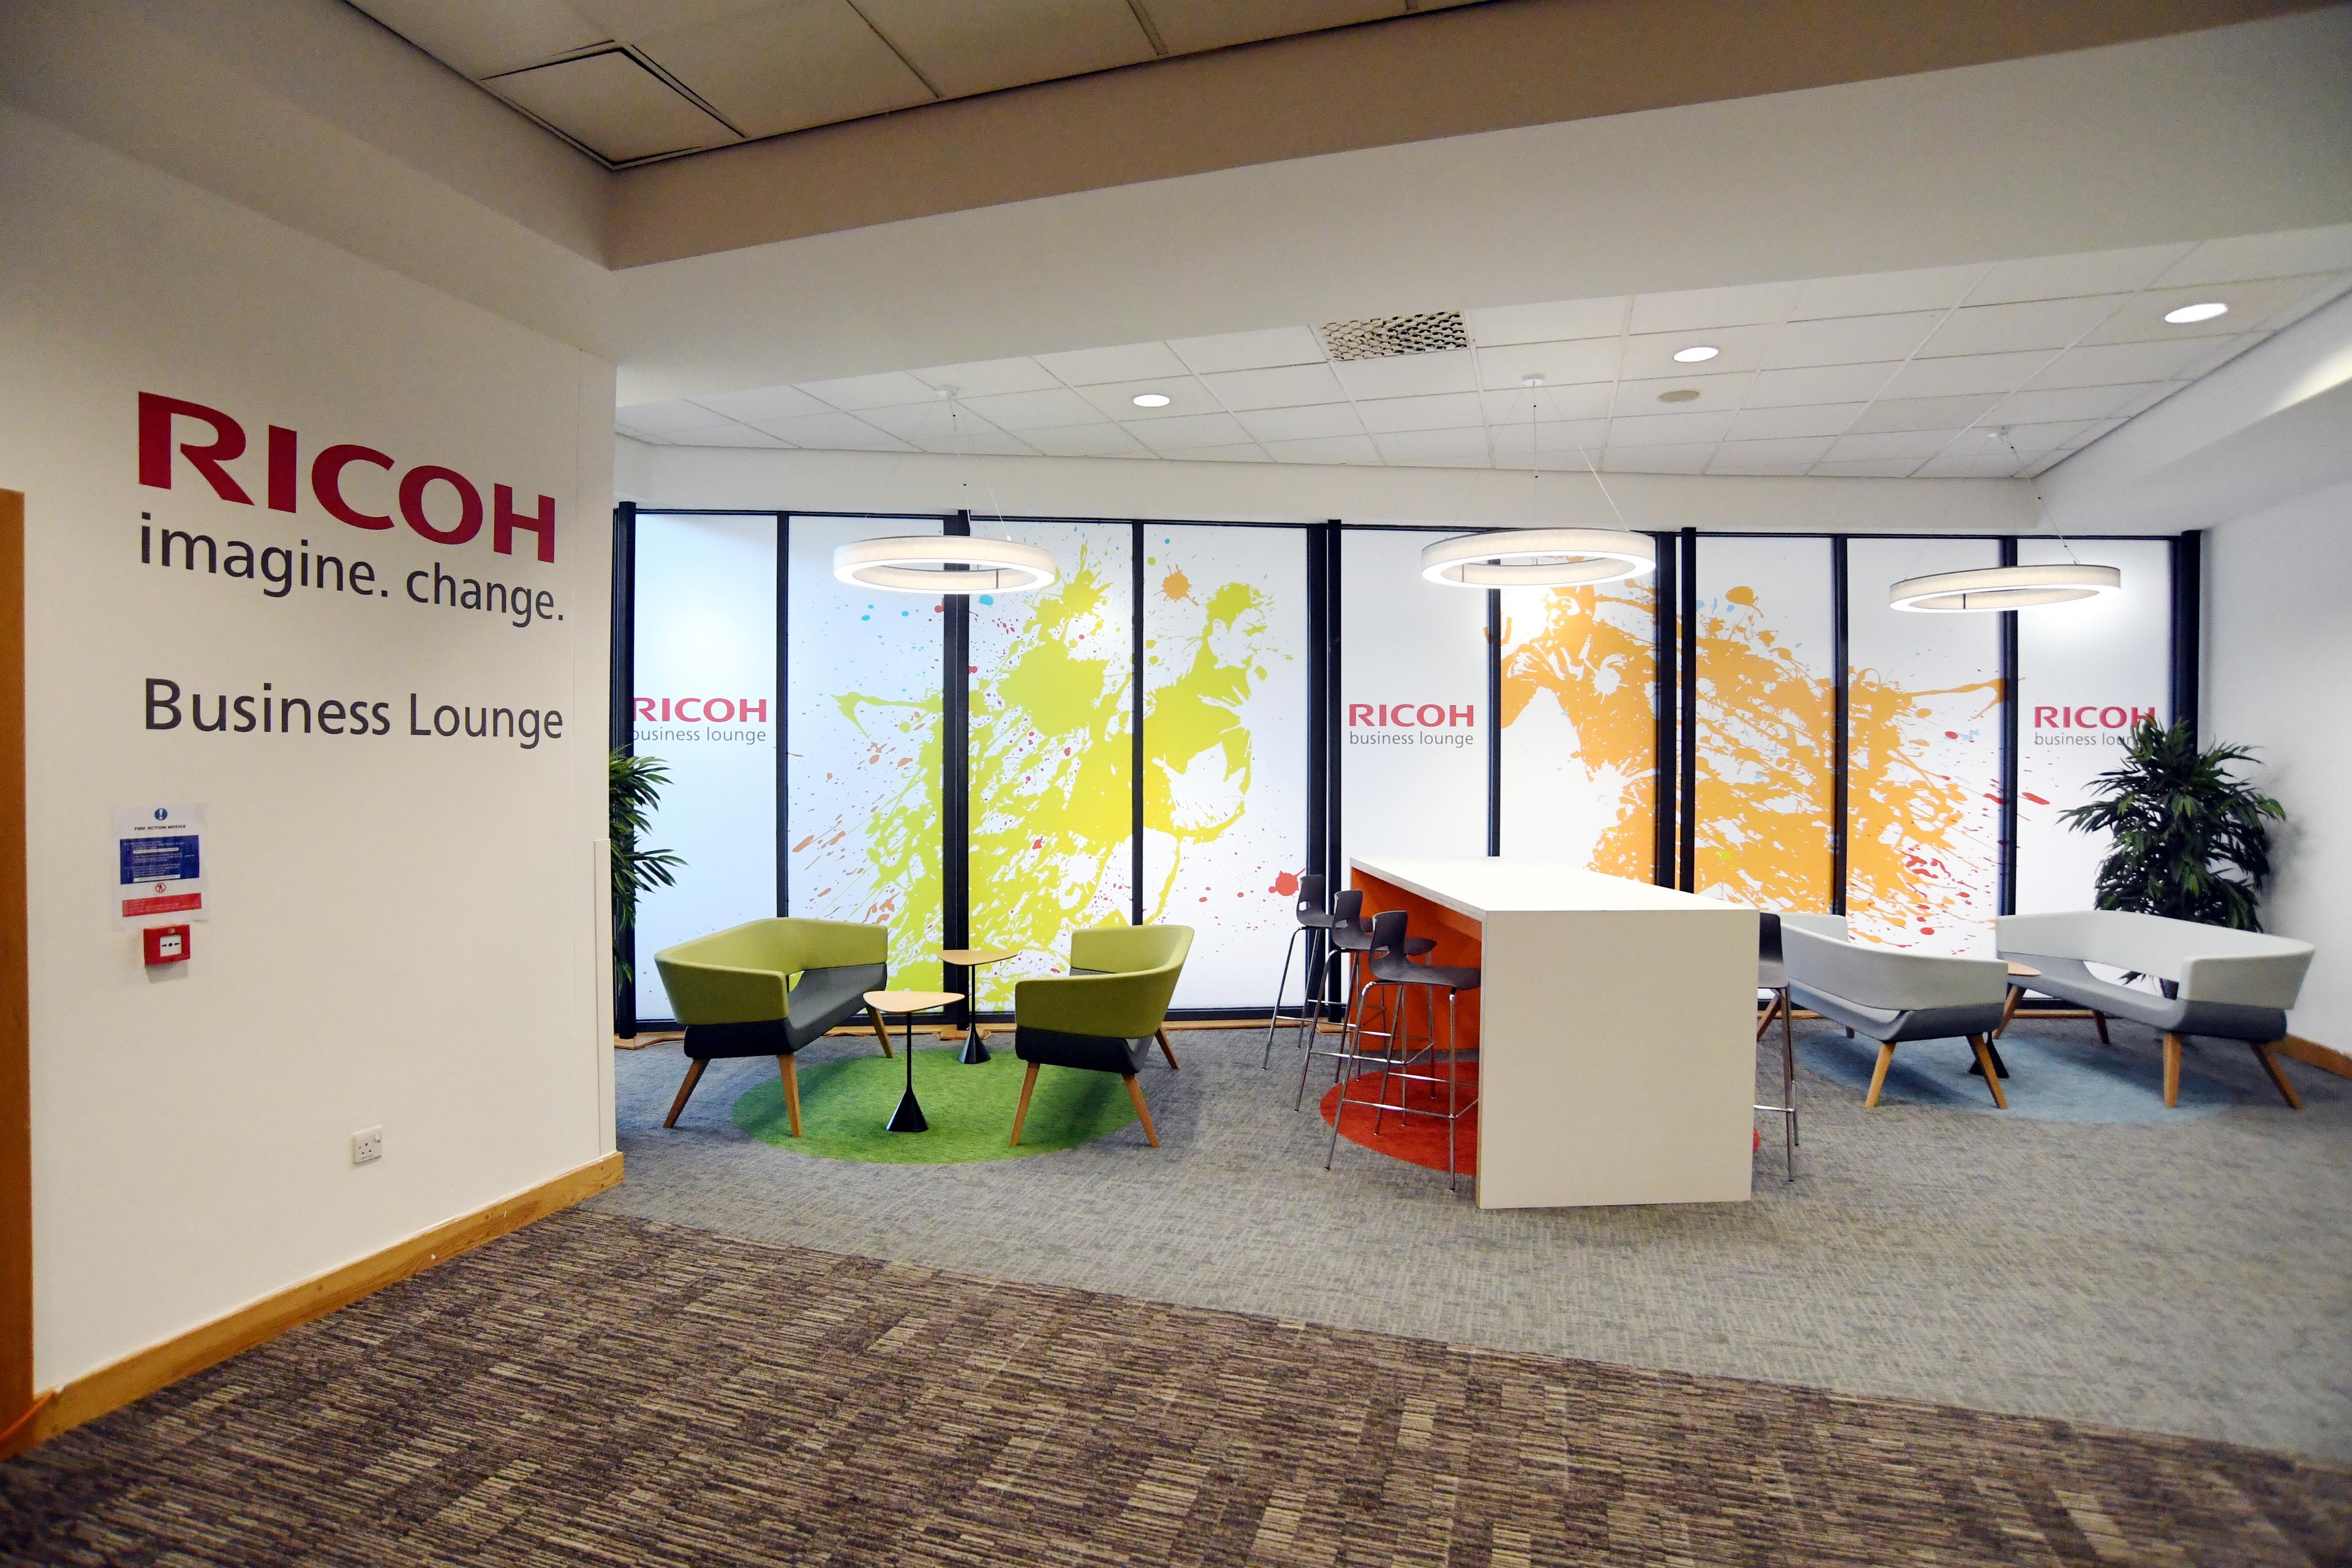 Ricoh Business Lounge Centre, Coventry Building Society Arena photo #2